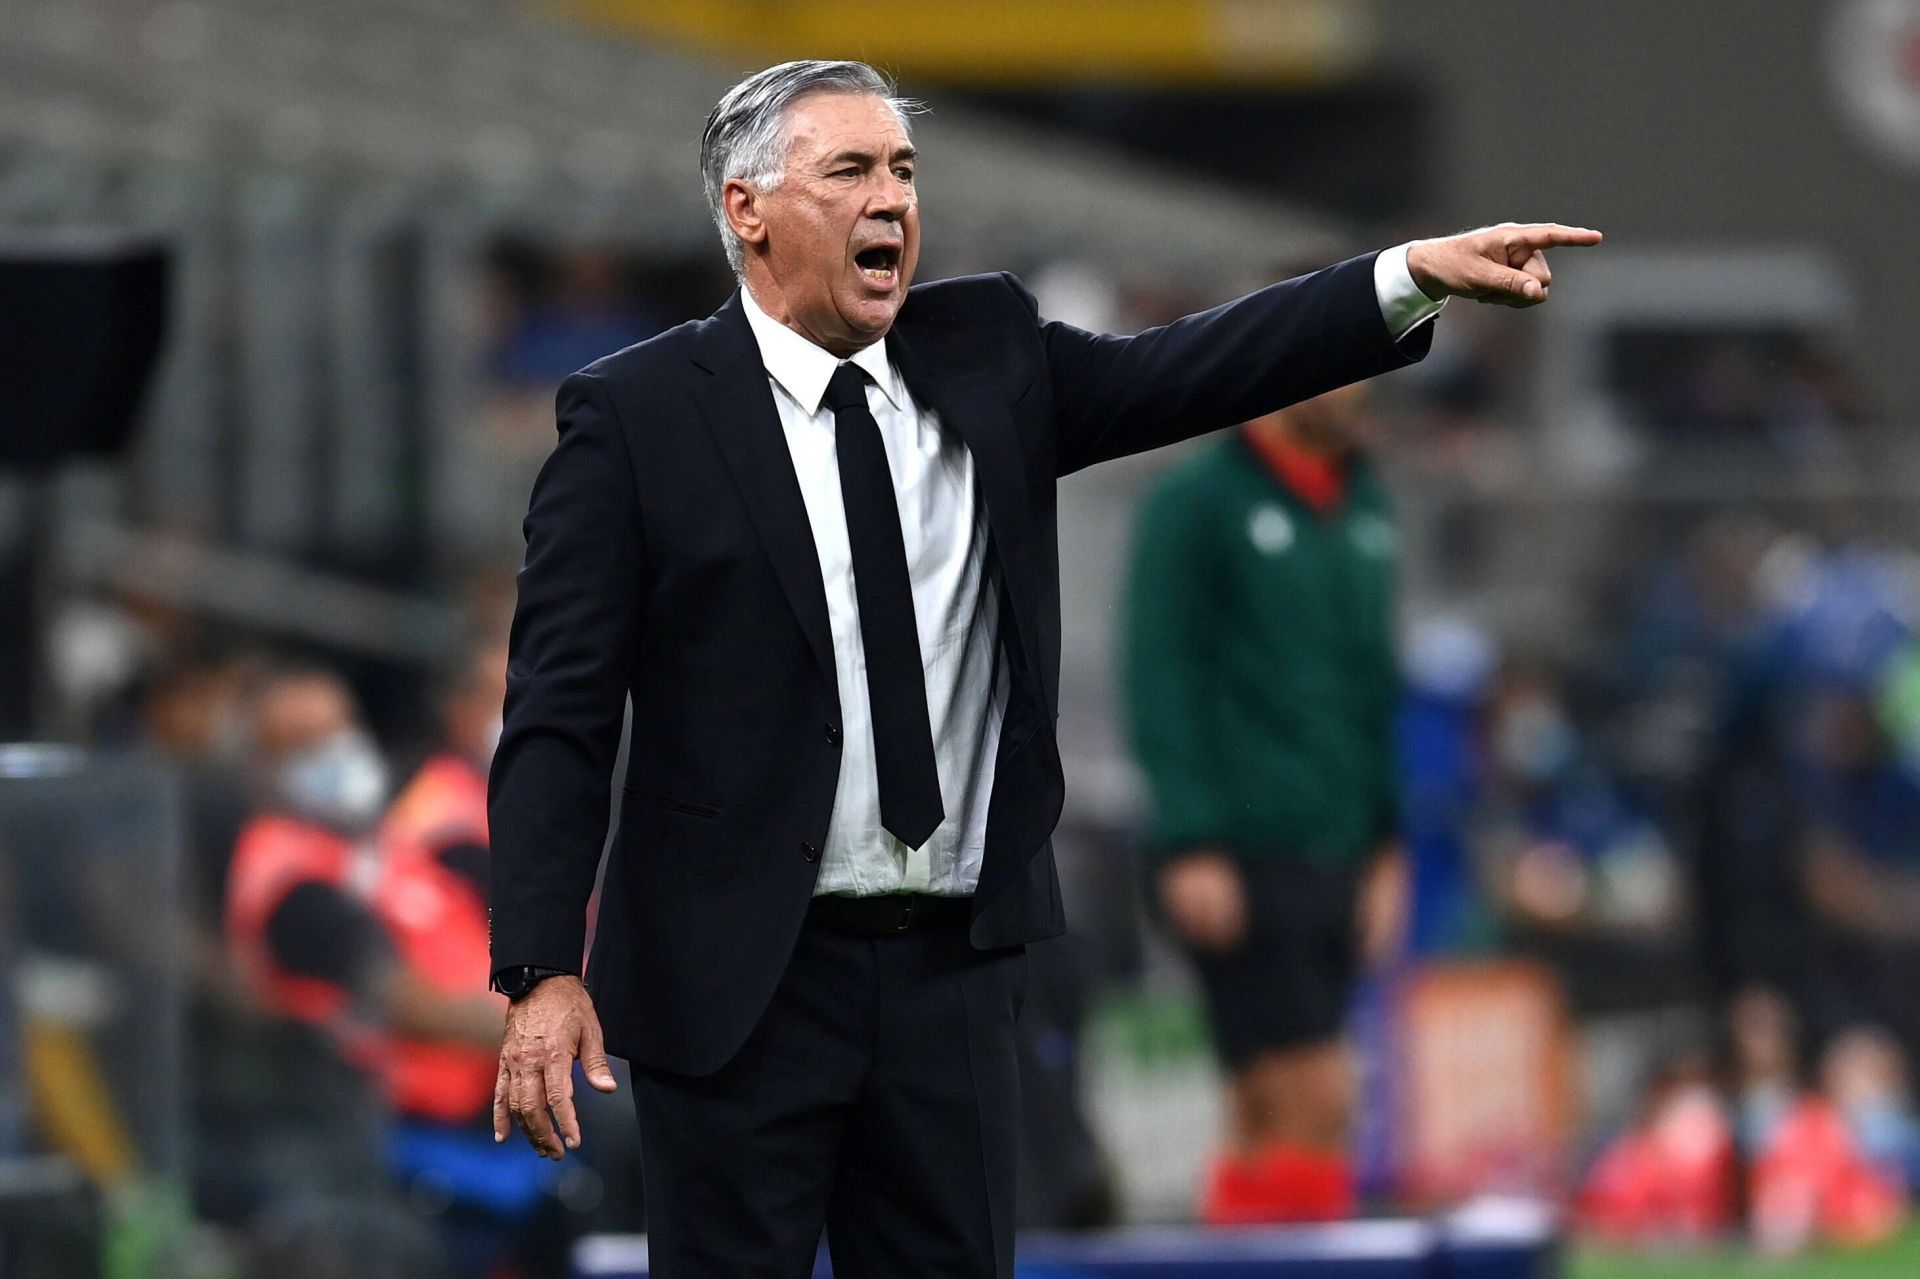 Ancelotti may opt to give some of his first-team players rest.